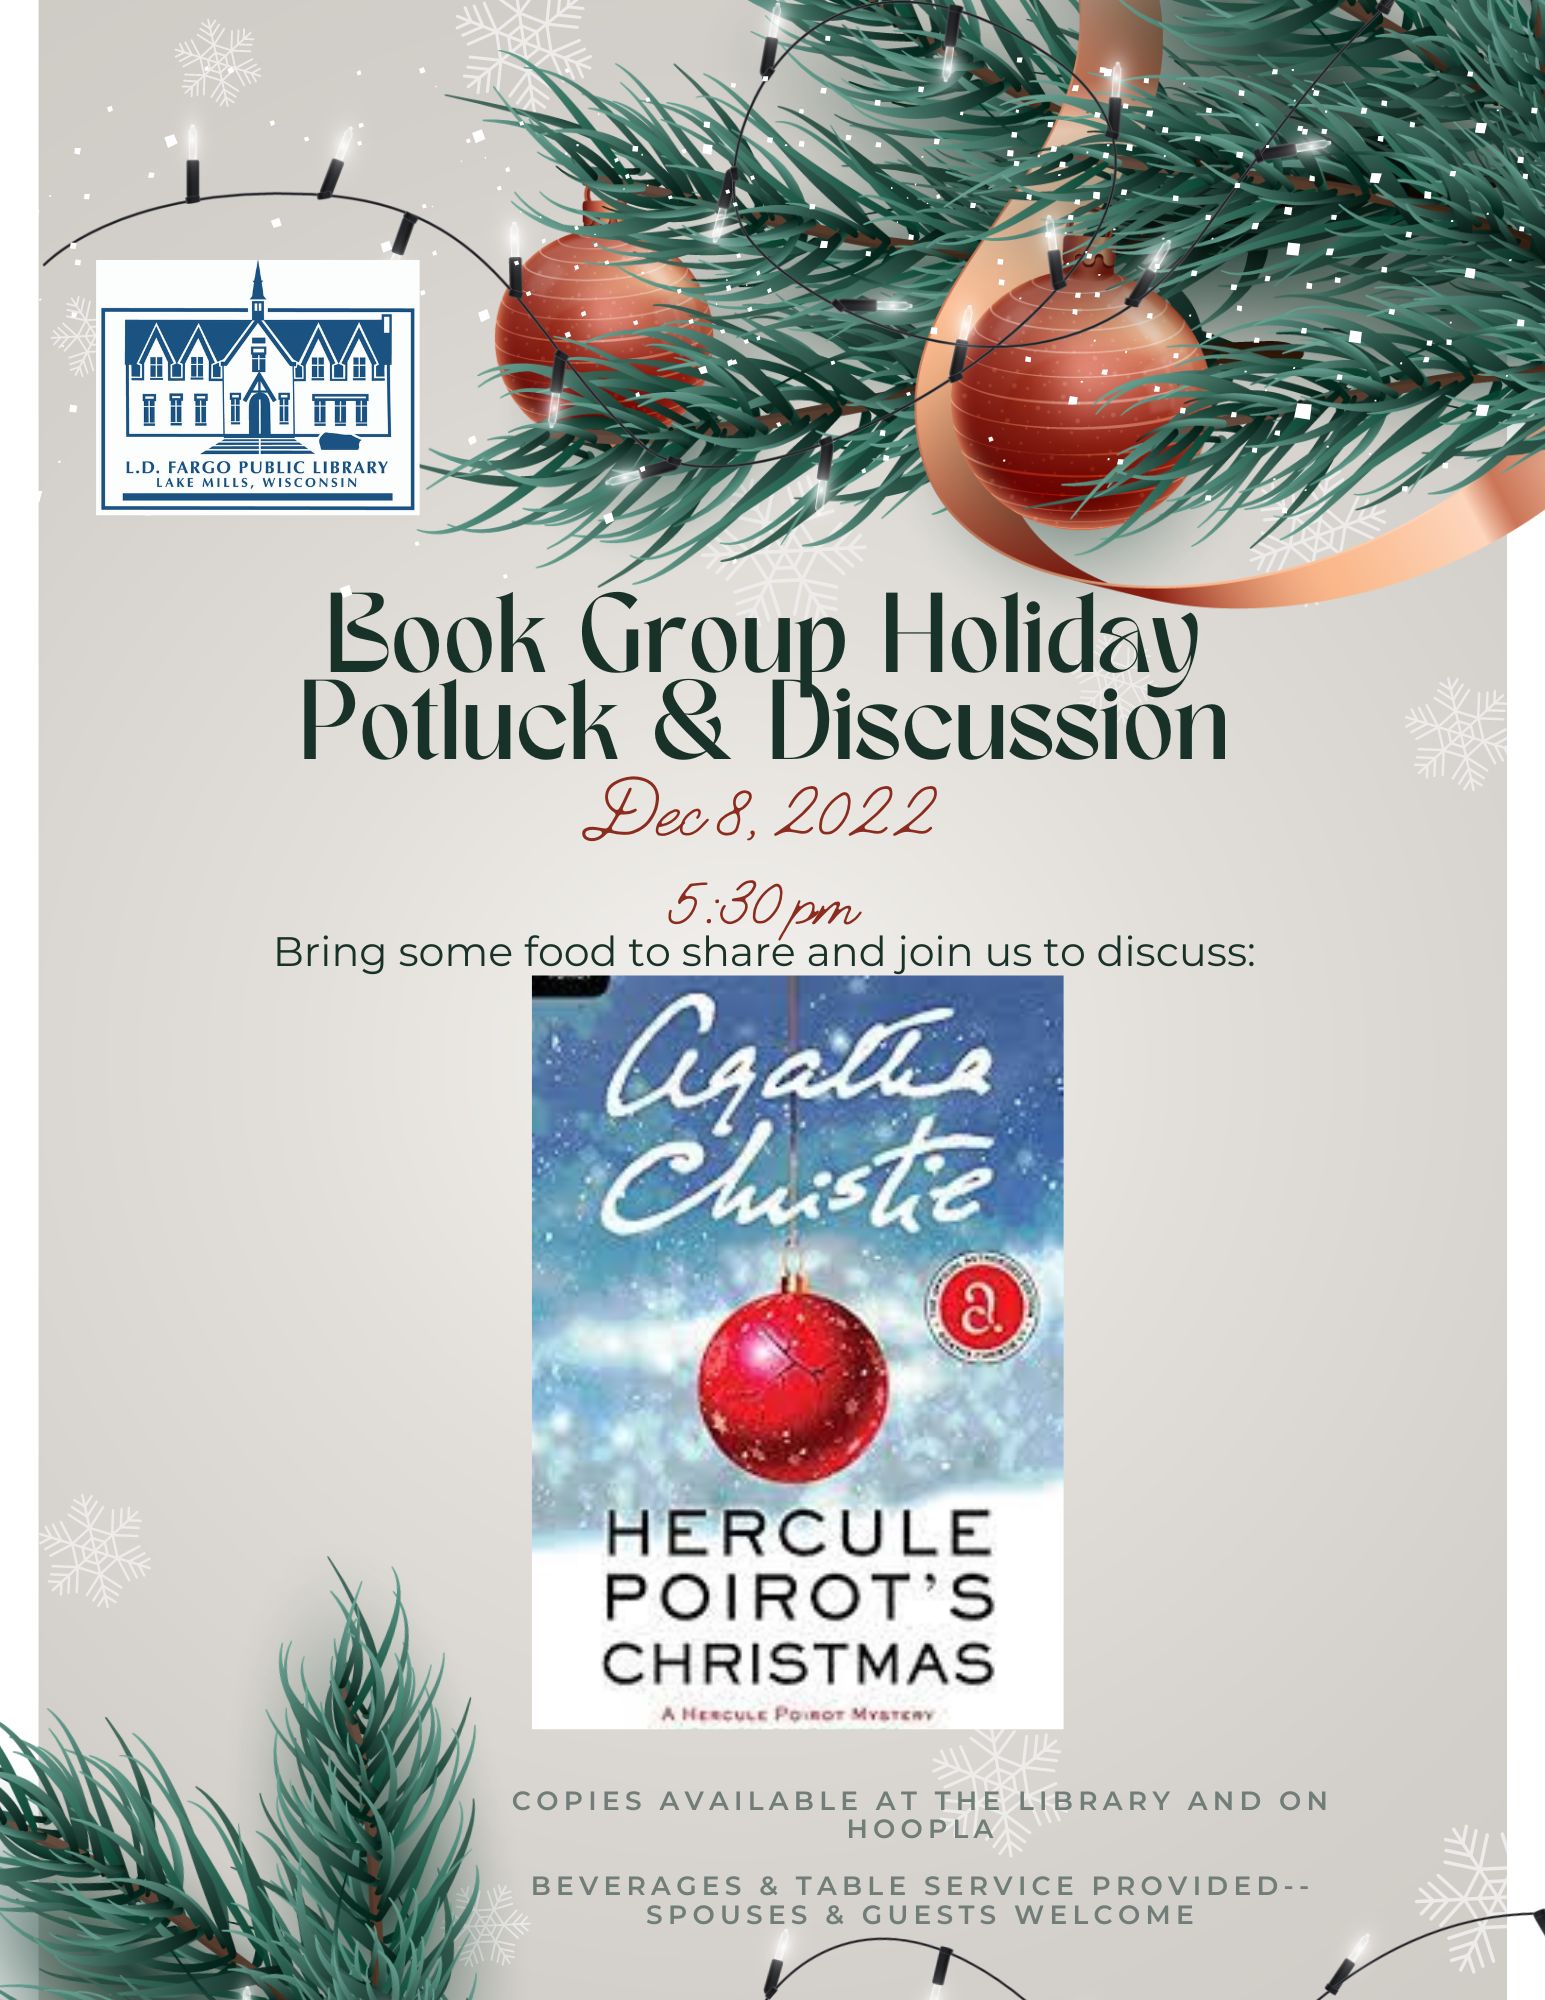 Book Group Holiday Potluck & Discussion. Dec 8, 2022 5:30 pm. Bring some food to share and join us to discuss: Hercule Poriot's Christmas by Agatha Christie.